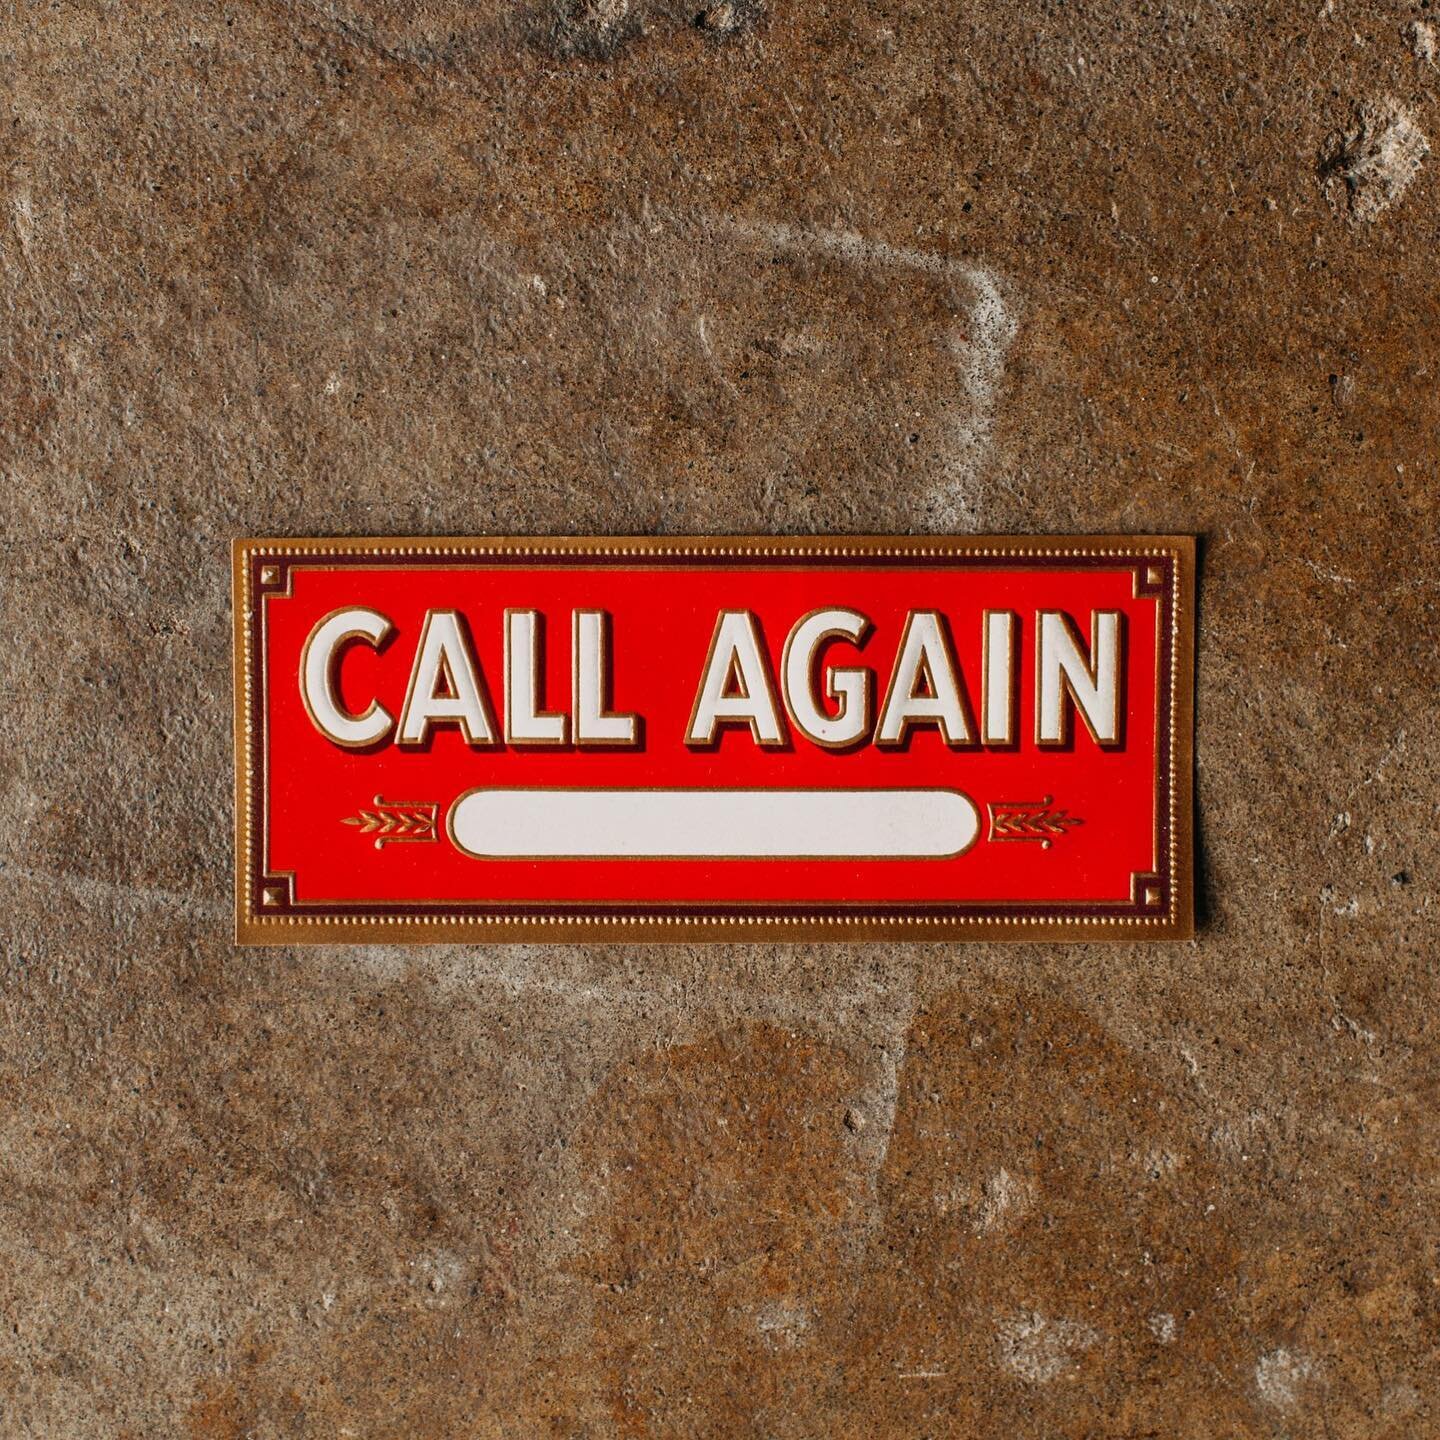 &ldquo;Call Again&rdquo; Cigar Label

Call Again Cigar label, estimated to be from the 1930&rsquo;s. This label was never used, but we believe was intended to be affixed to a cigar box. It is in like-new condition. This is an excellent example of typ